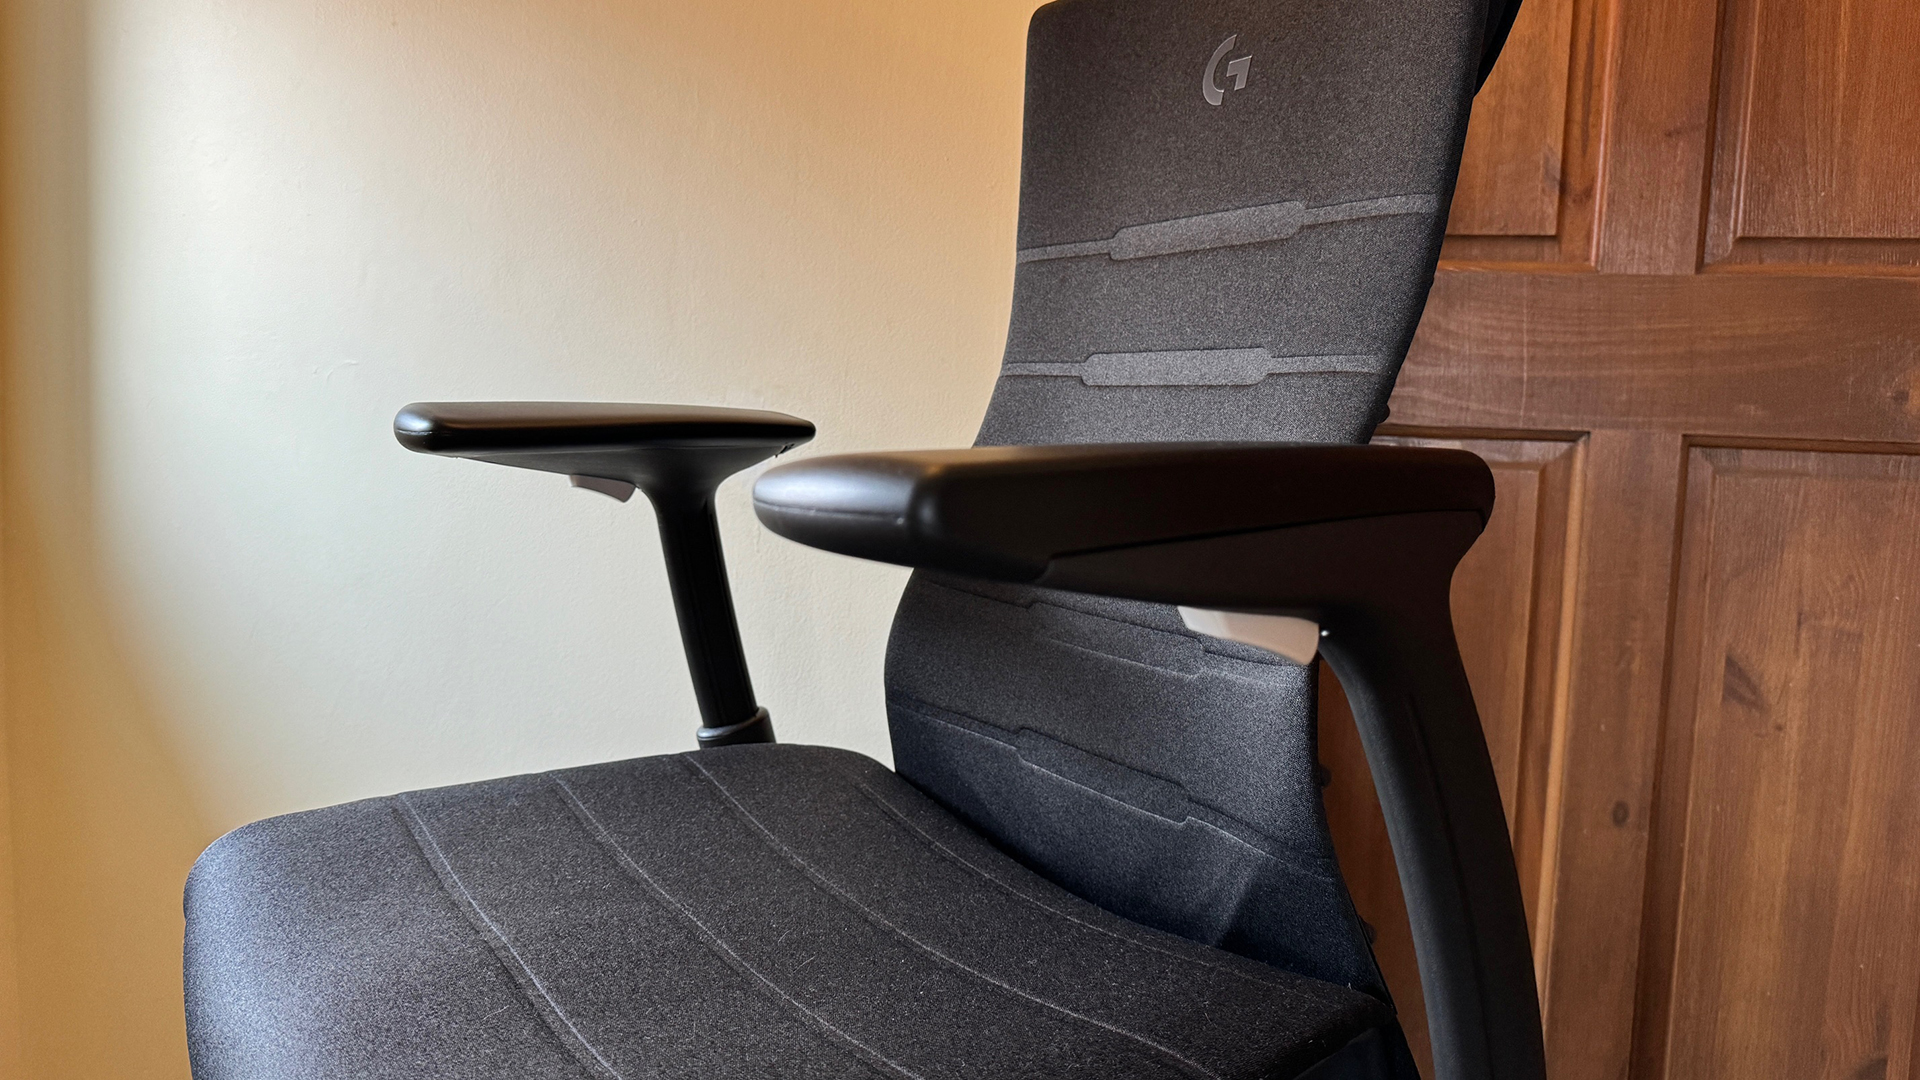 The Herman Miller Embody's arm rests, side profile.